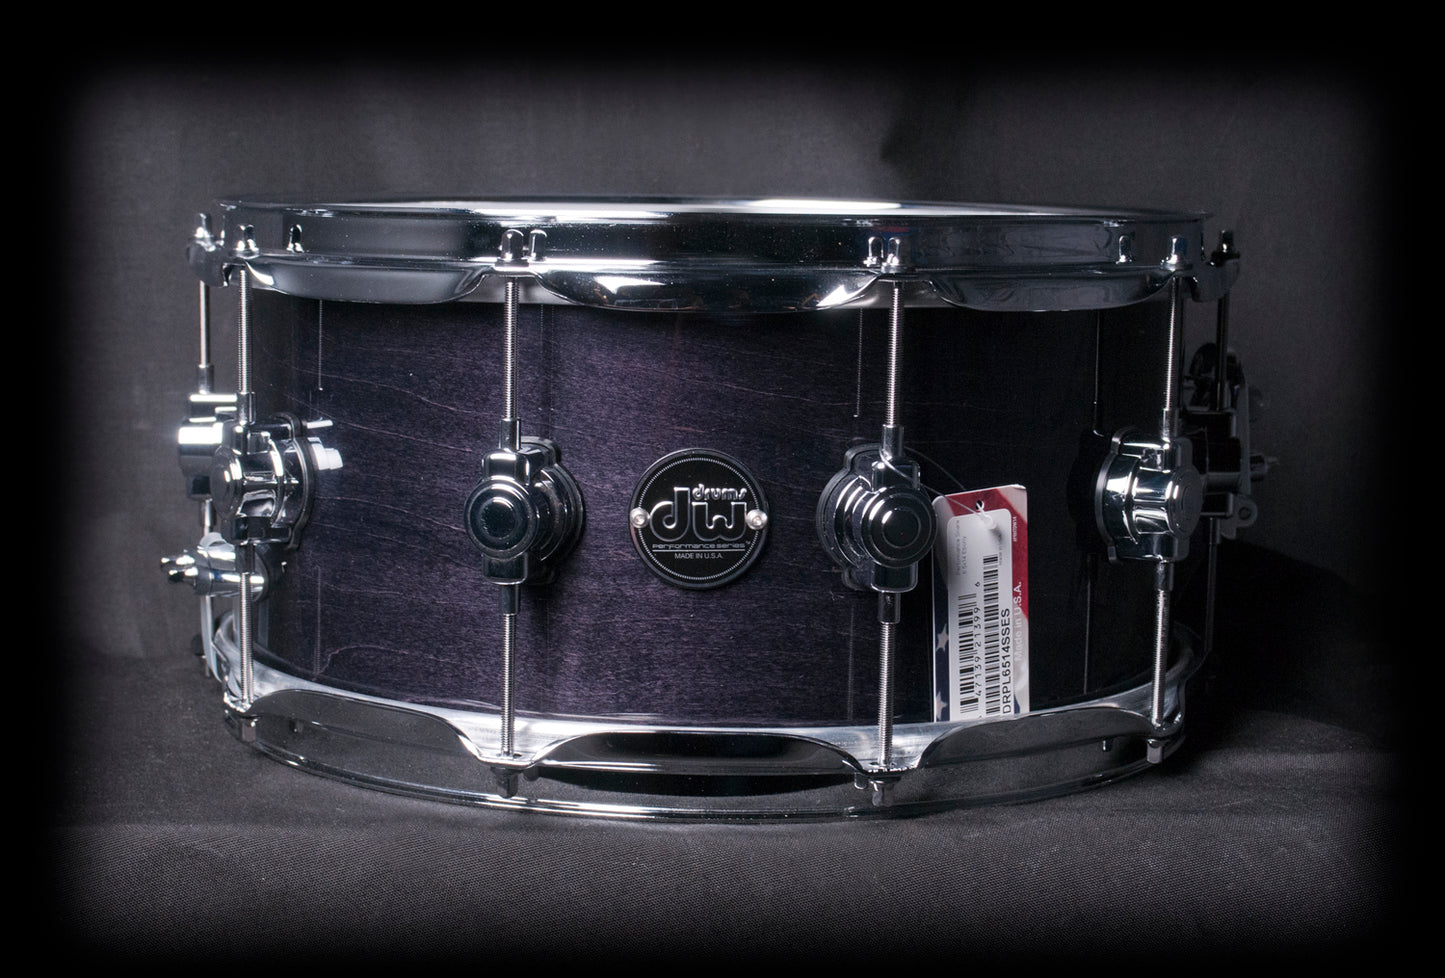 Drum Workshop Performance Series 14x6.5 Snare Drum in Lacquer Ebony Stain